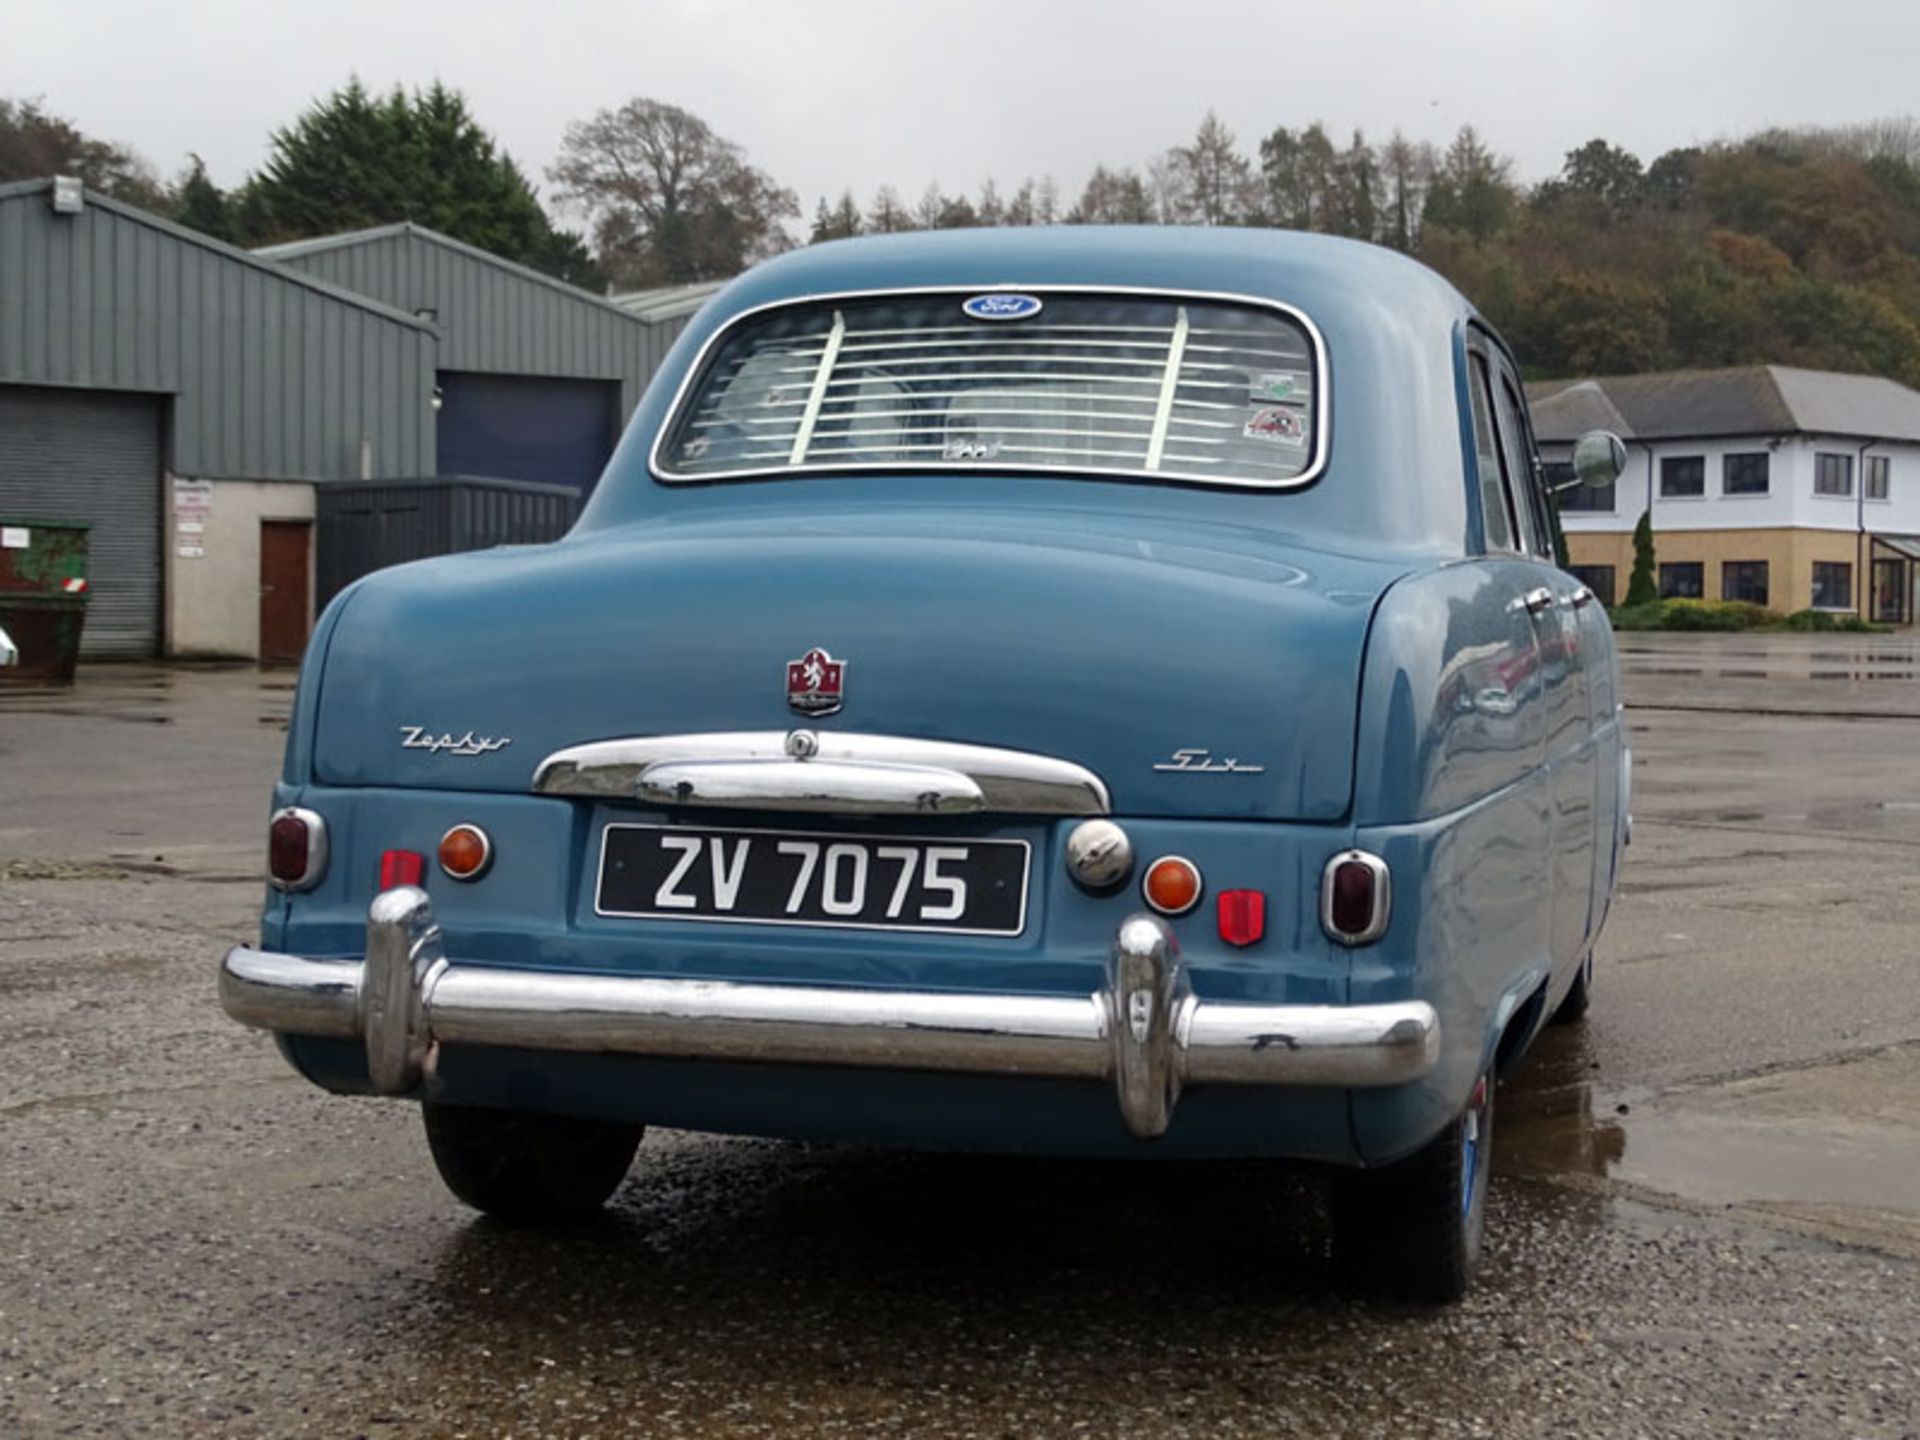 1953 Ford Zephyr 6 - Image 12 of 12